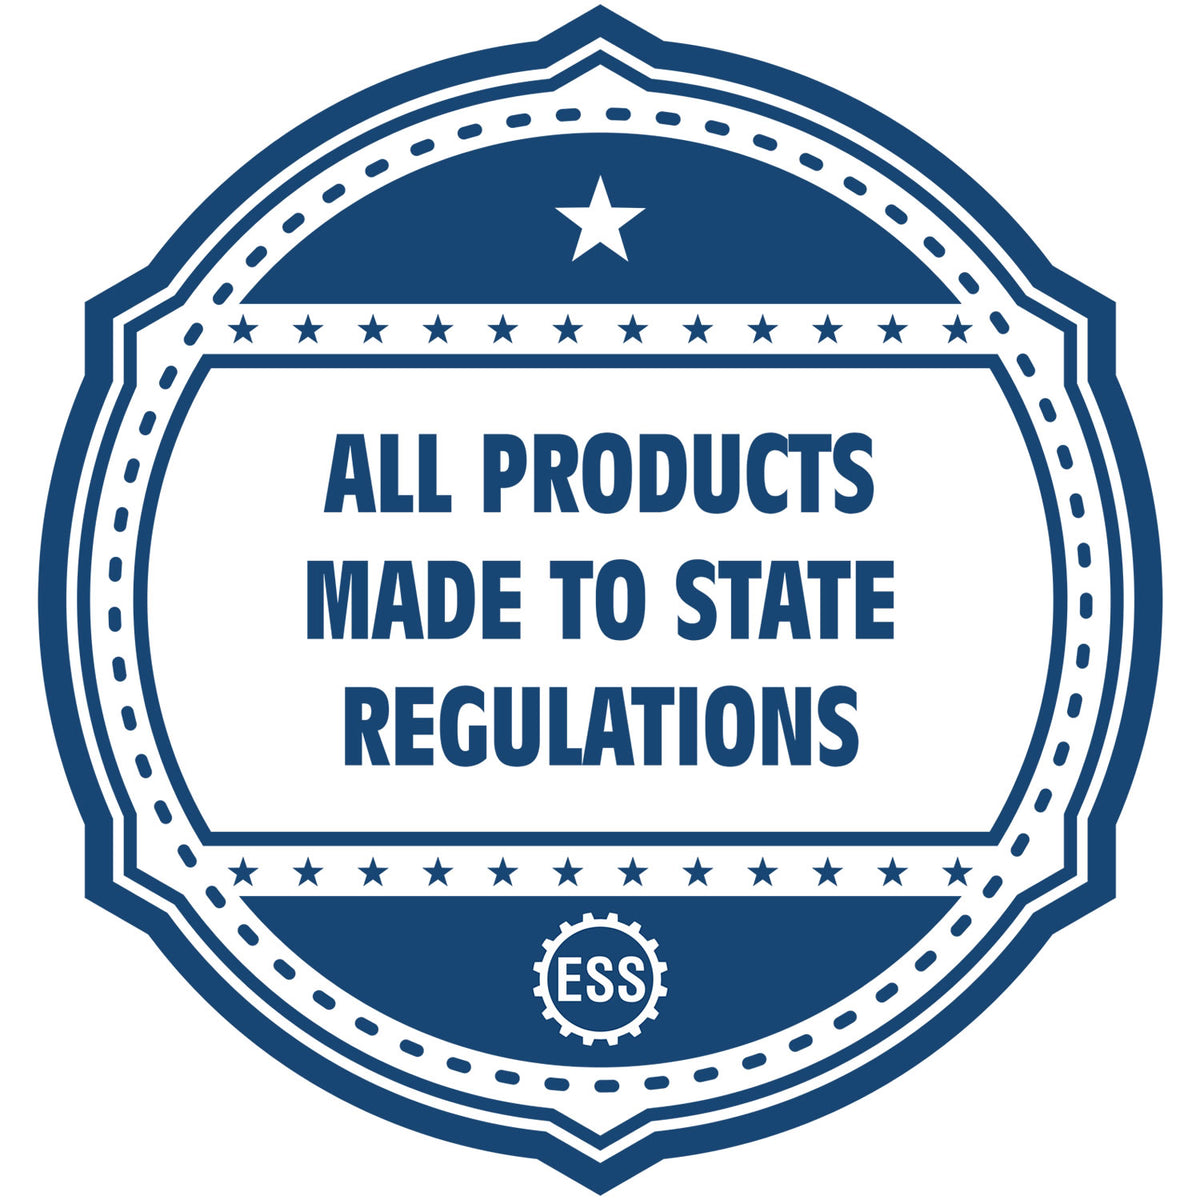 An icon or badge element for the Connecticut Landscape Architectural Seal Stamp showing that this product is made in compliance with state regulations.